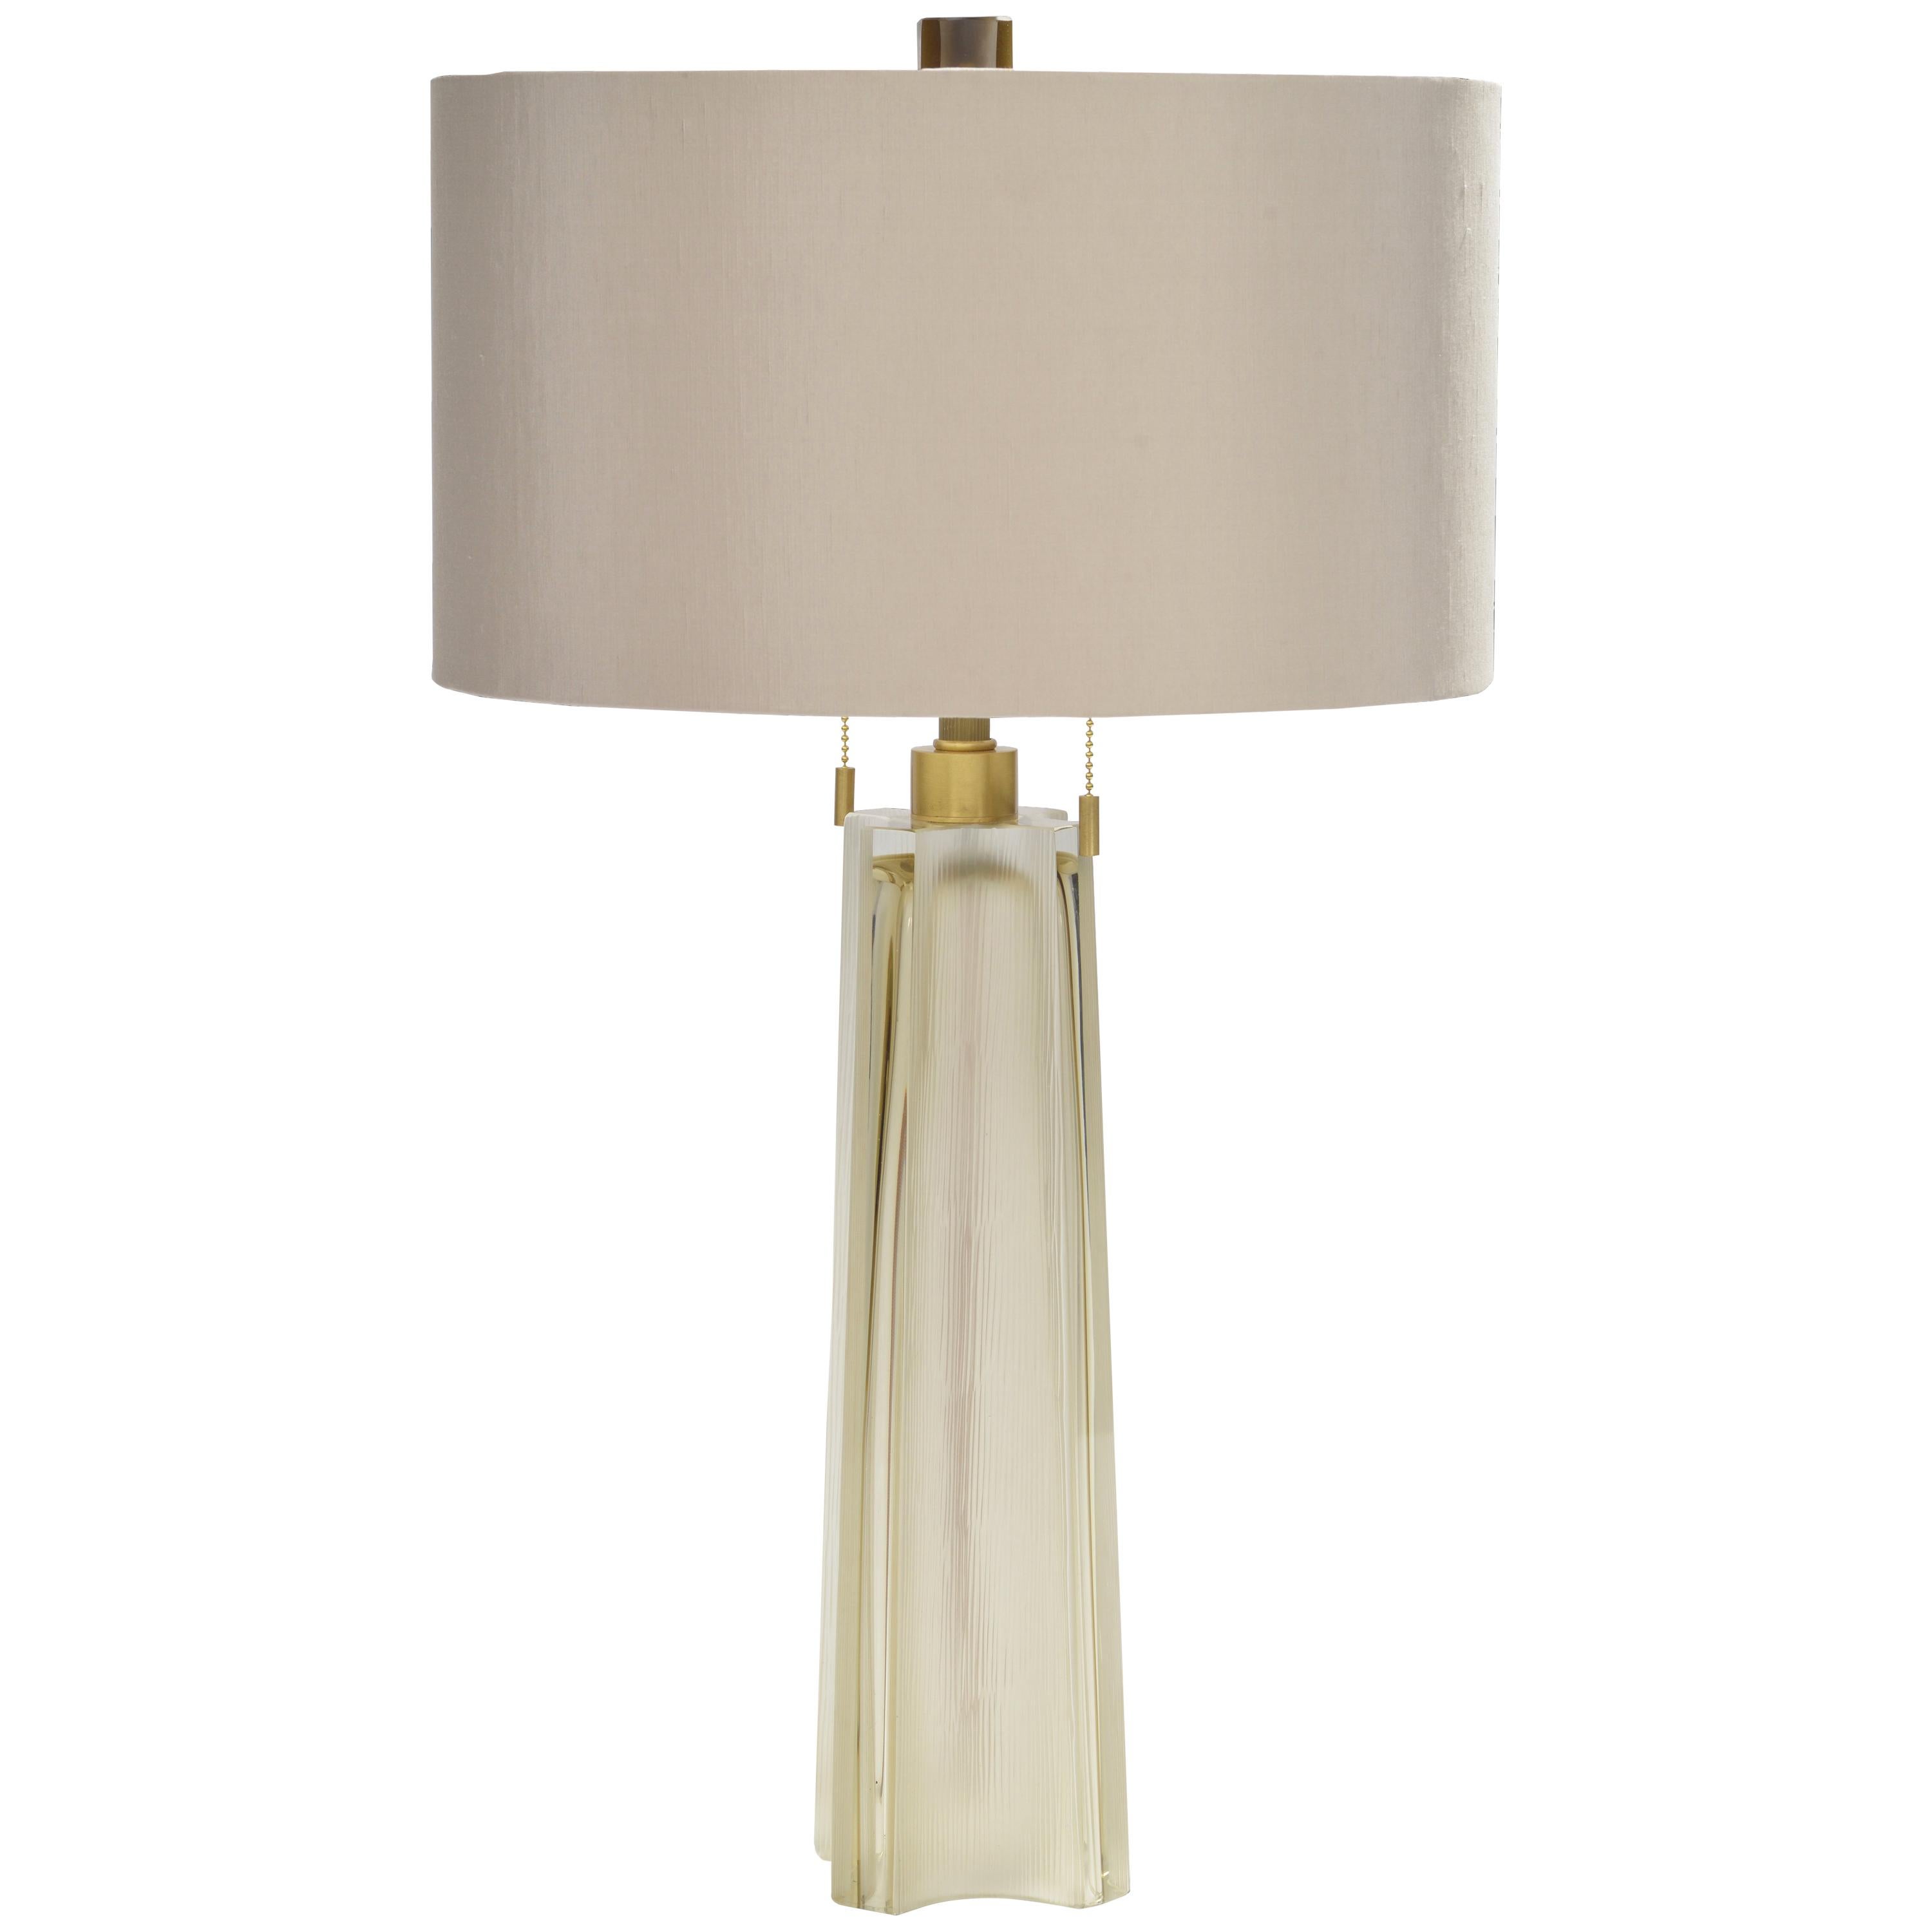 Donghia Quatrefoil Battuto Lamp and Shade, Citron Murano Glass with Satin Finish For Sale